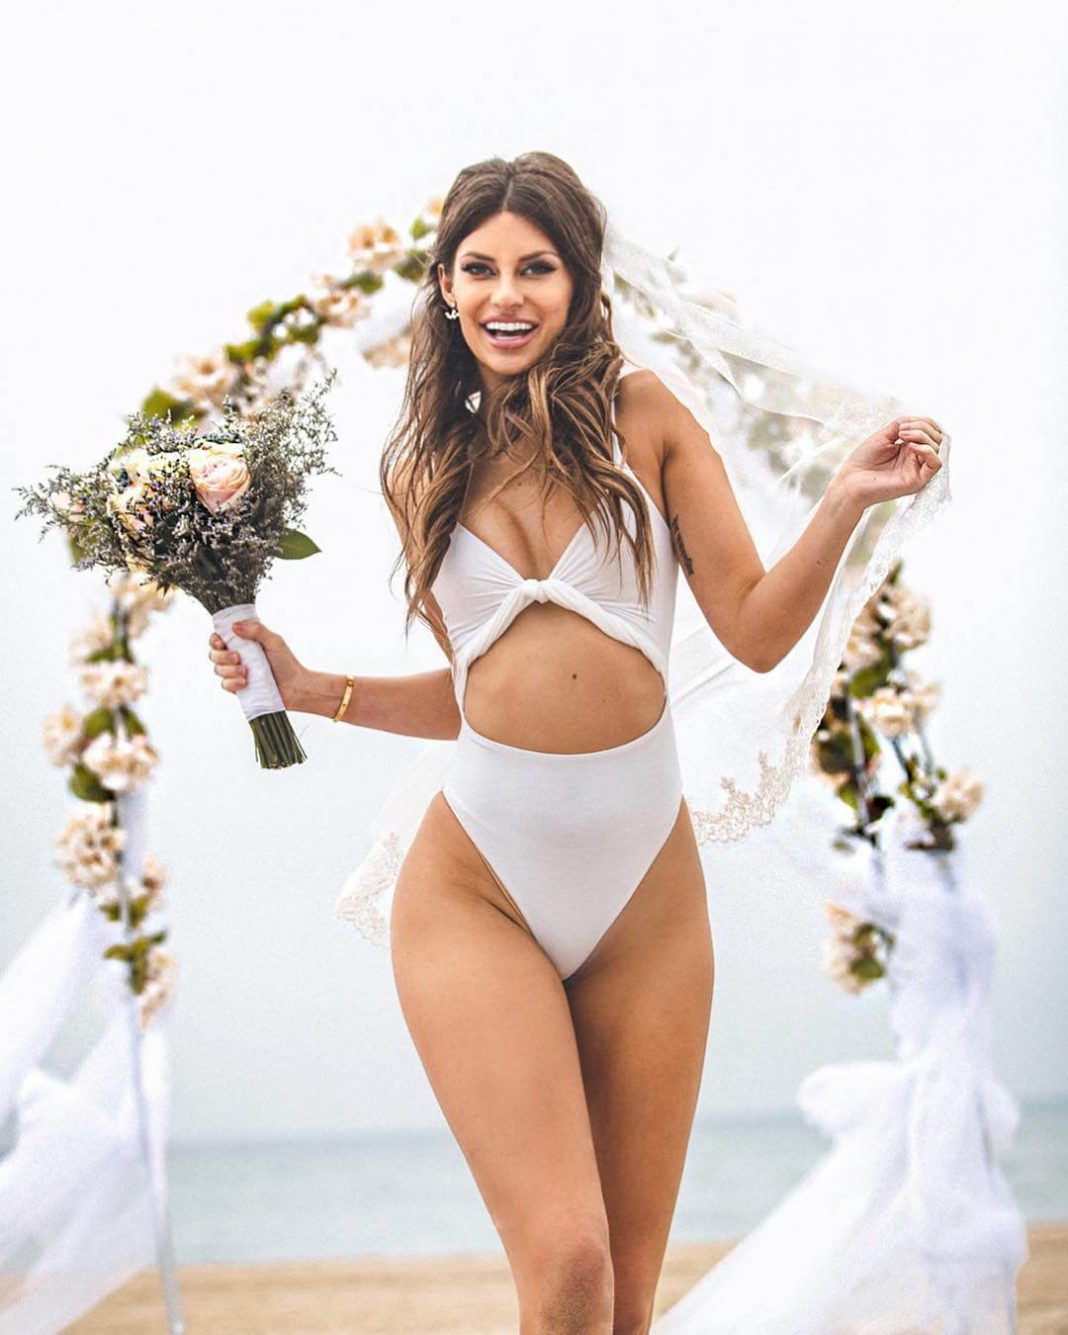 51 Hannah Stocking Nude Pictures Will Make You Slobber Over Her 69